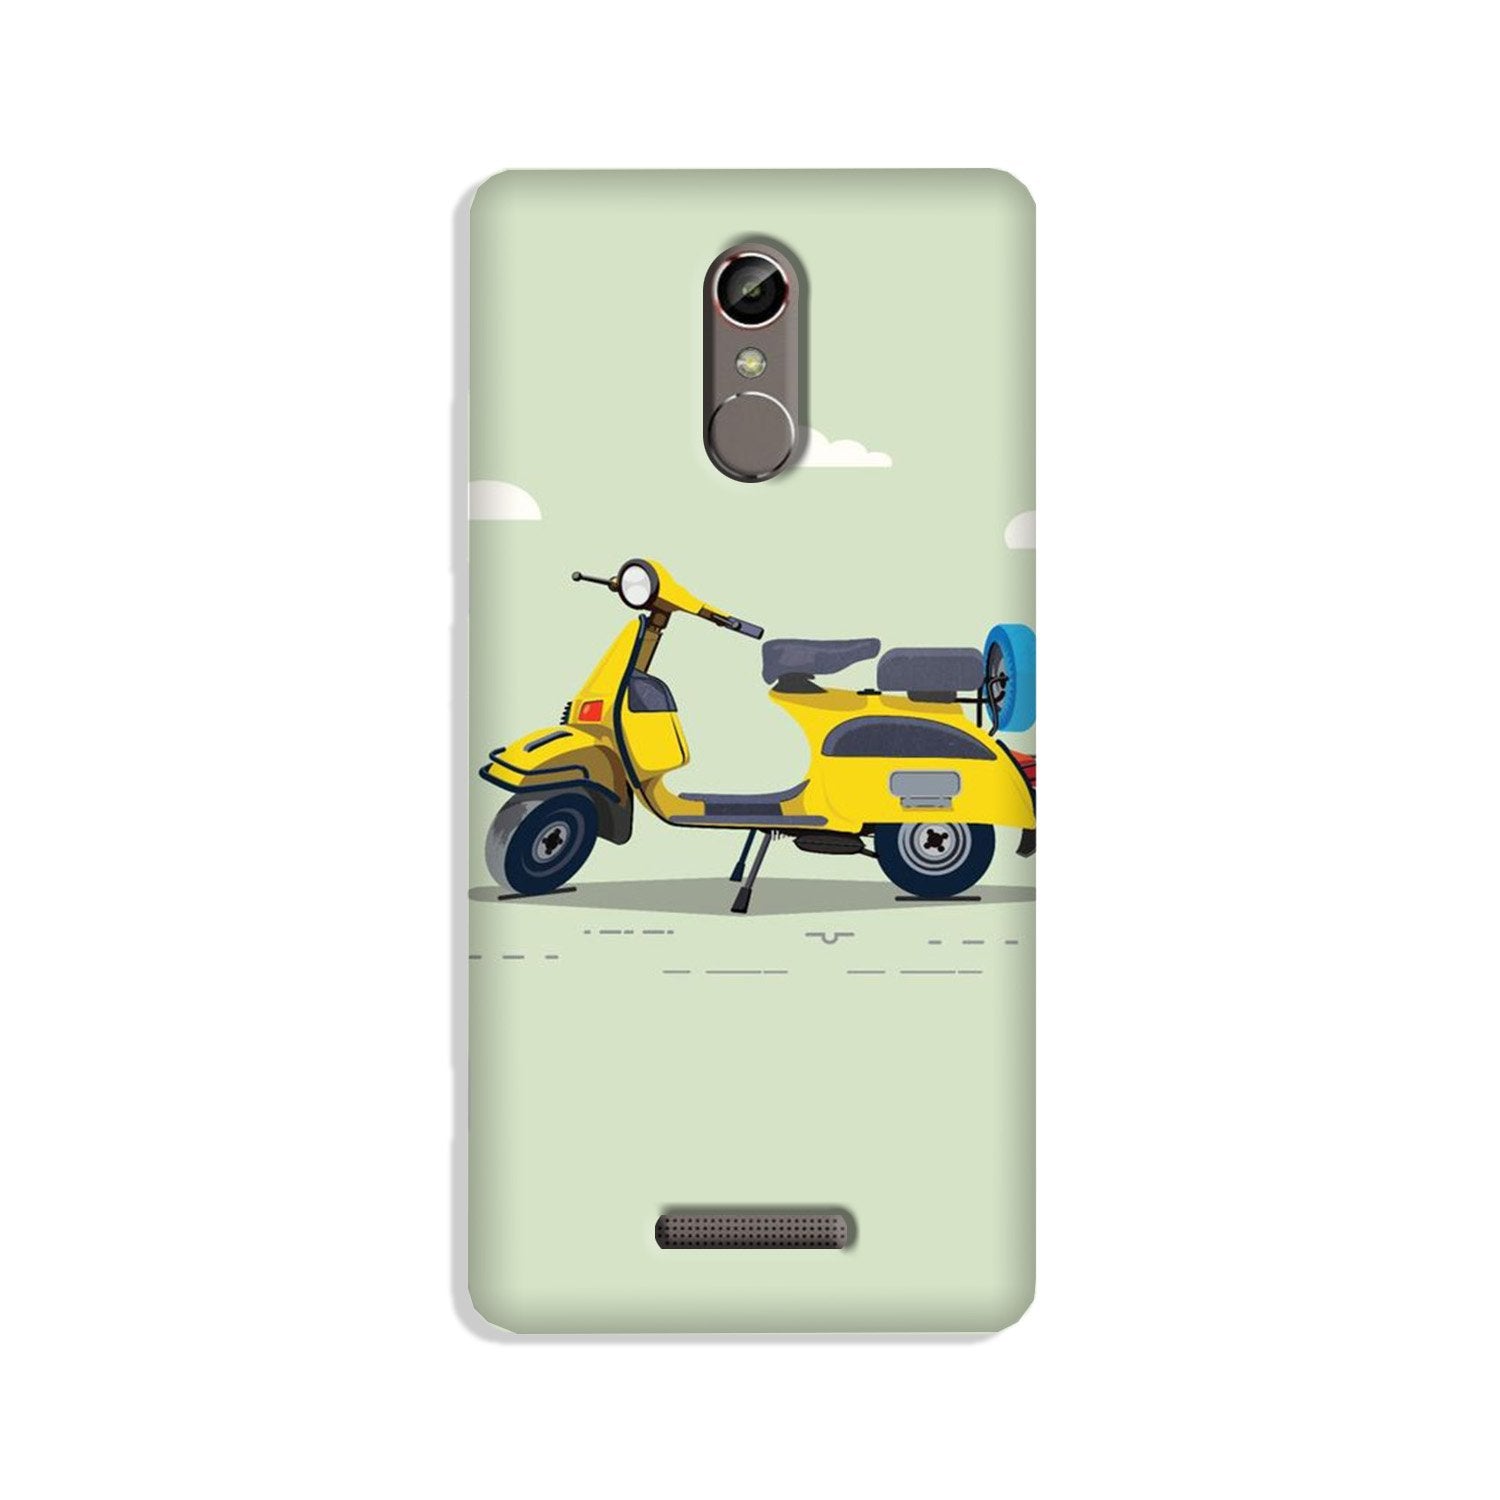 Vintage Scooter Case for Gionee S6s (Design No. 260)